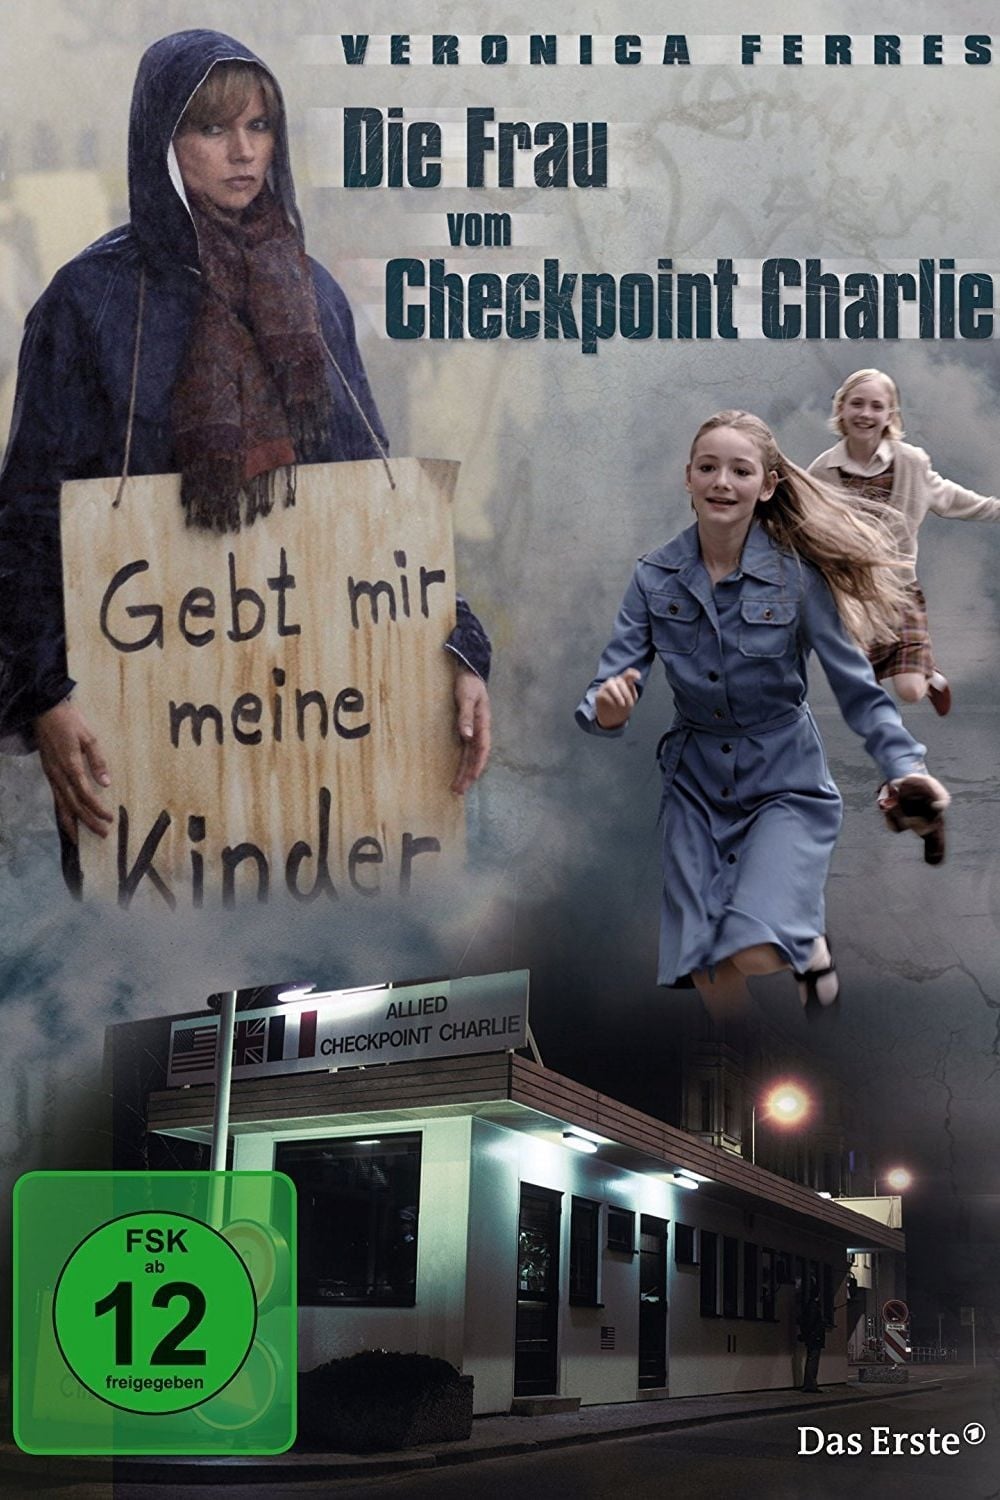 Die Frau vom Checkpoint Charlie TV Shows About Loss Of Loved One